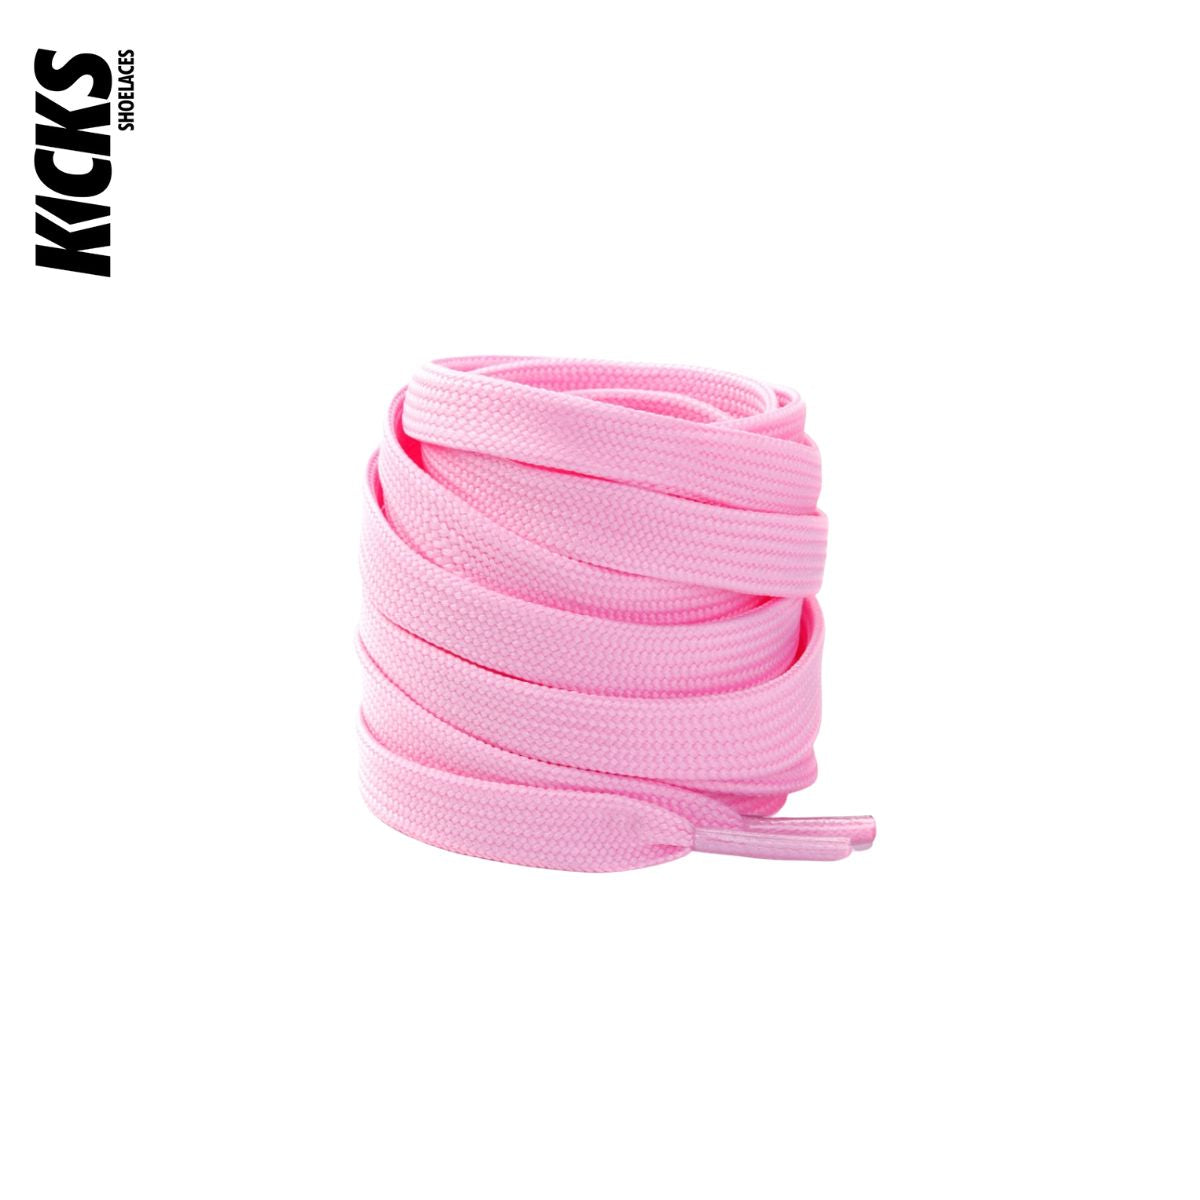 Pink Nike Dunks Shoelace Replacements